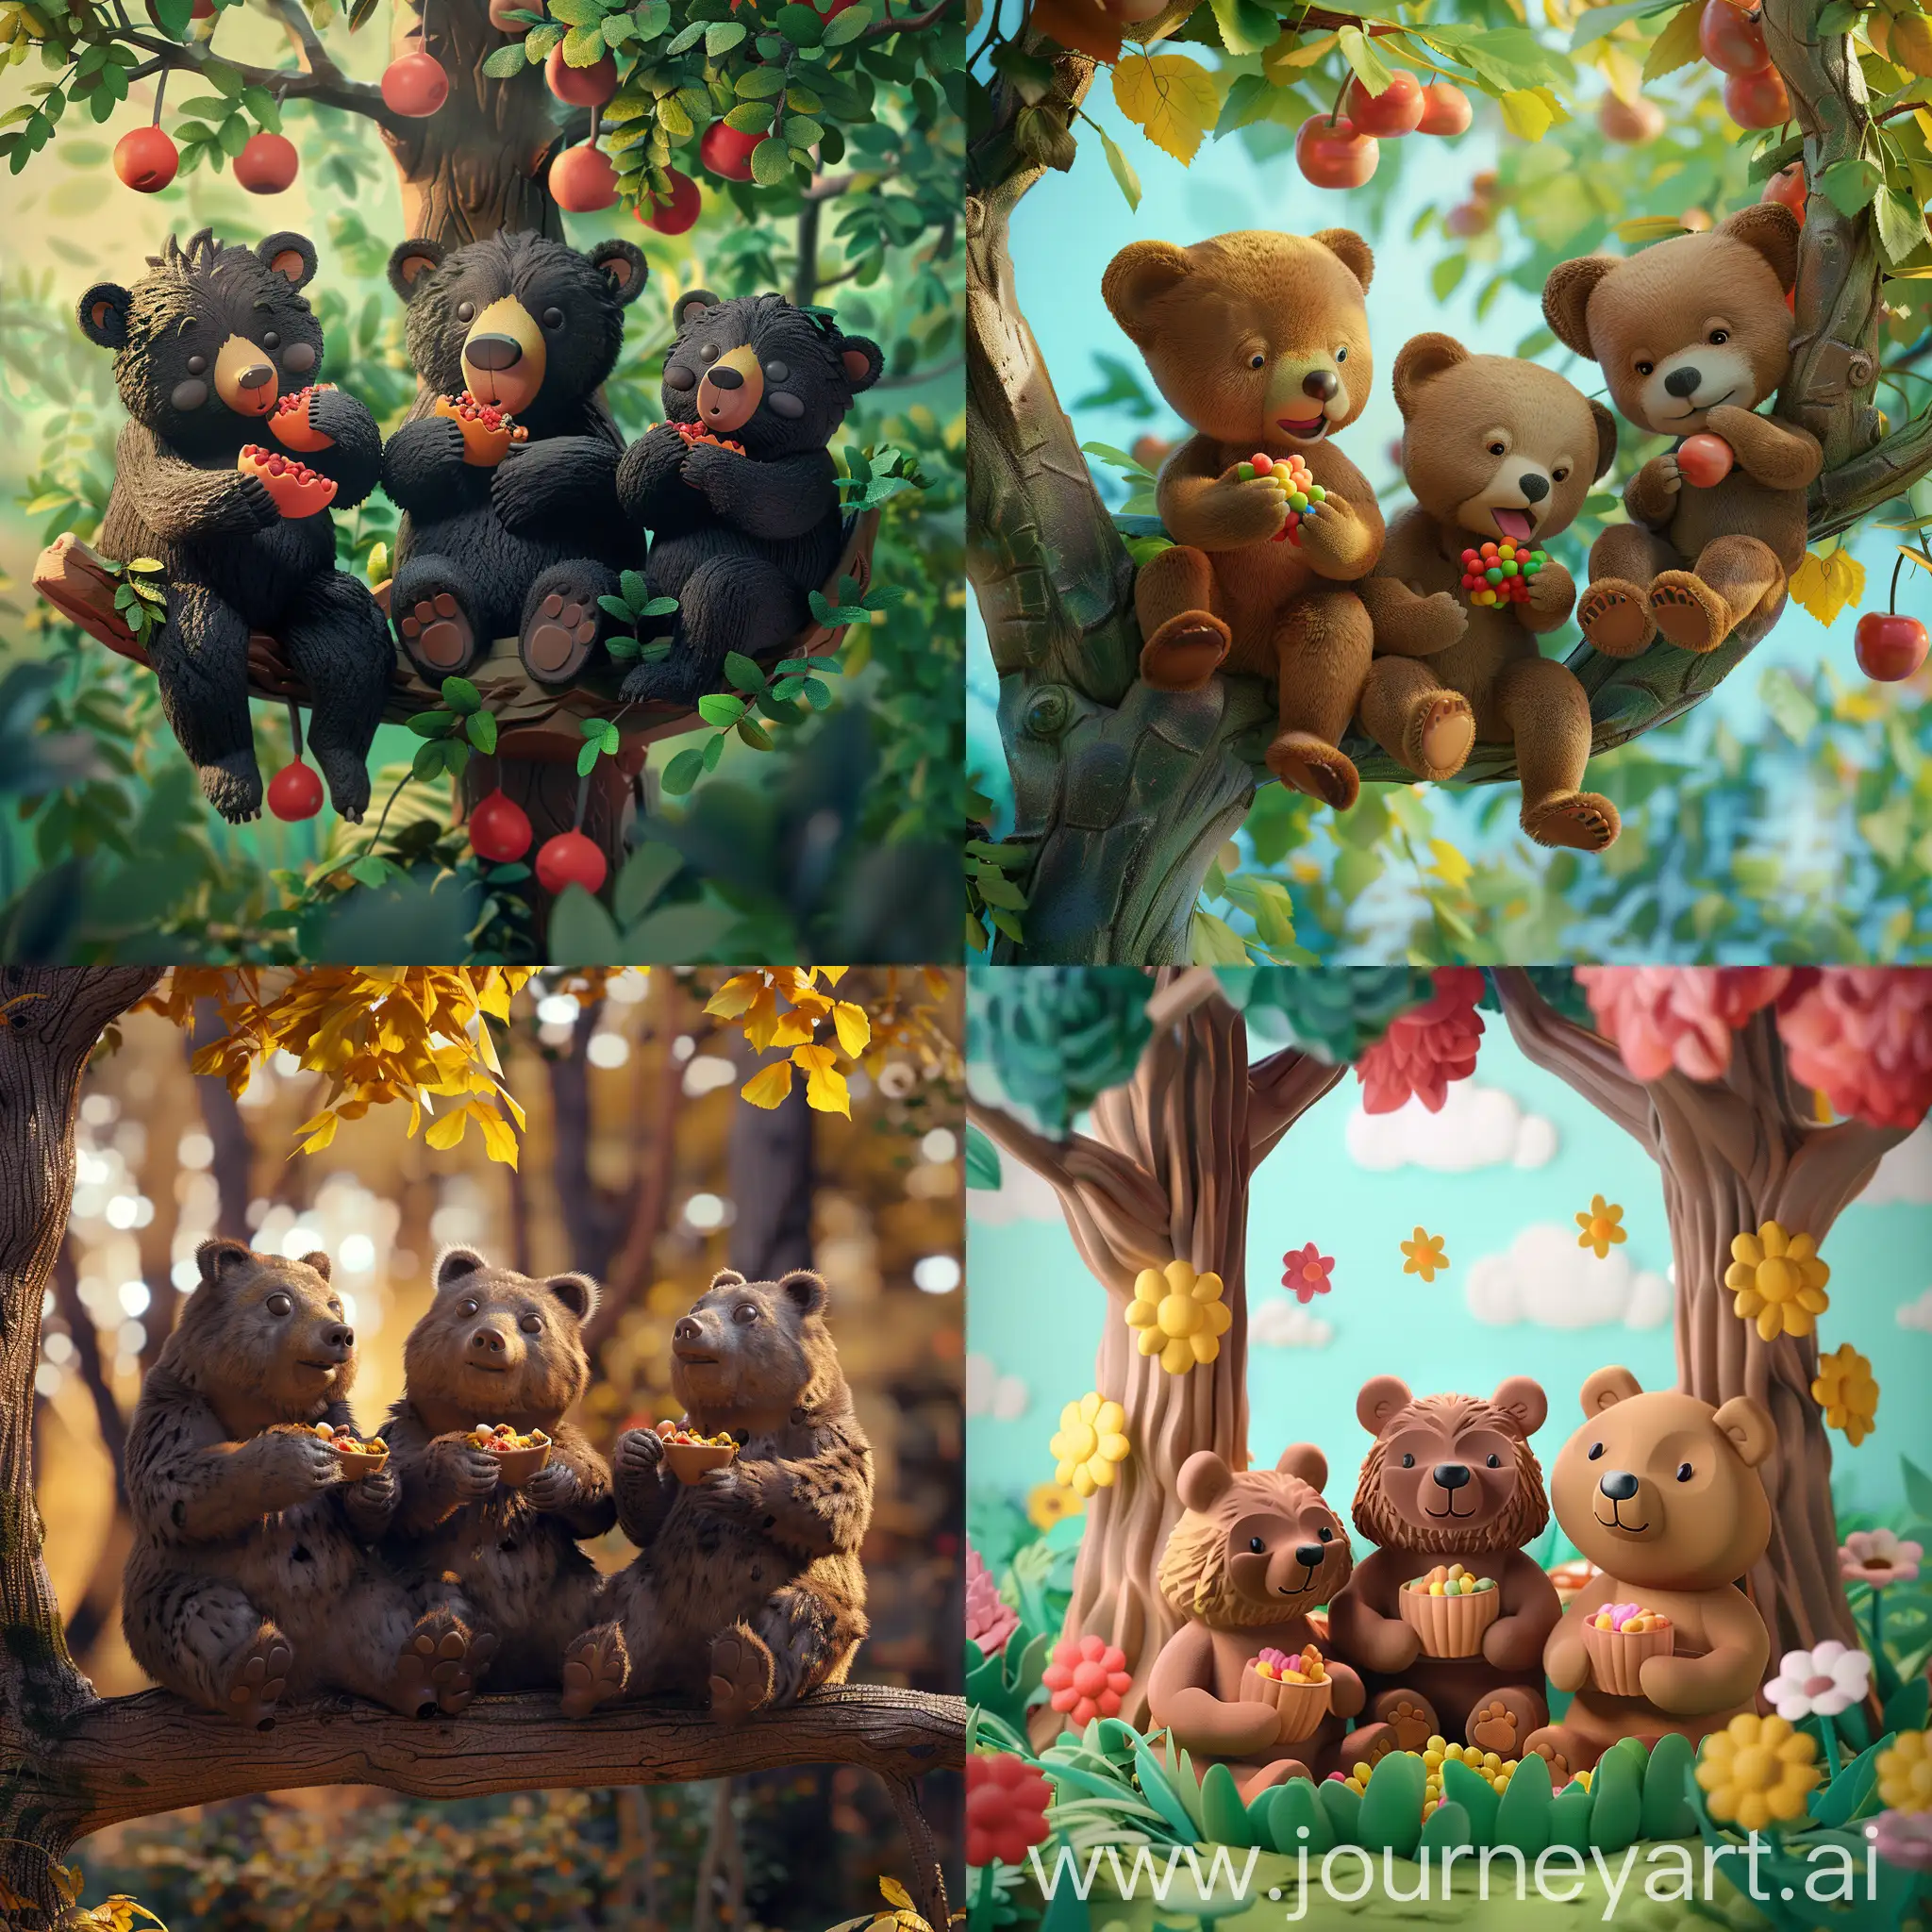 Adorable-3D-Animation-Three-Bears-Enjoying-Candy-in-a-Tree